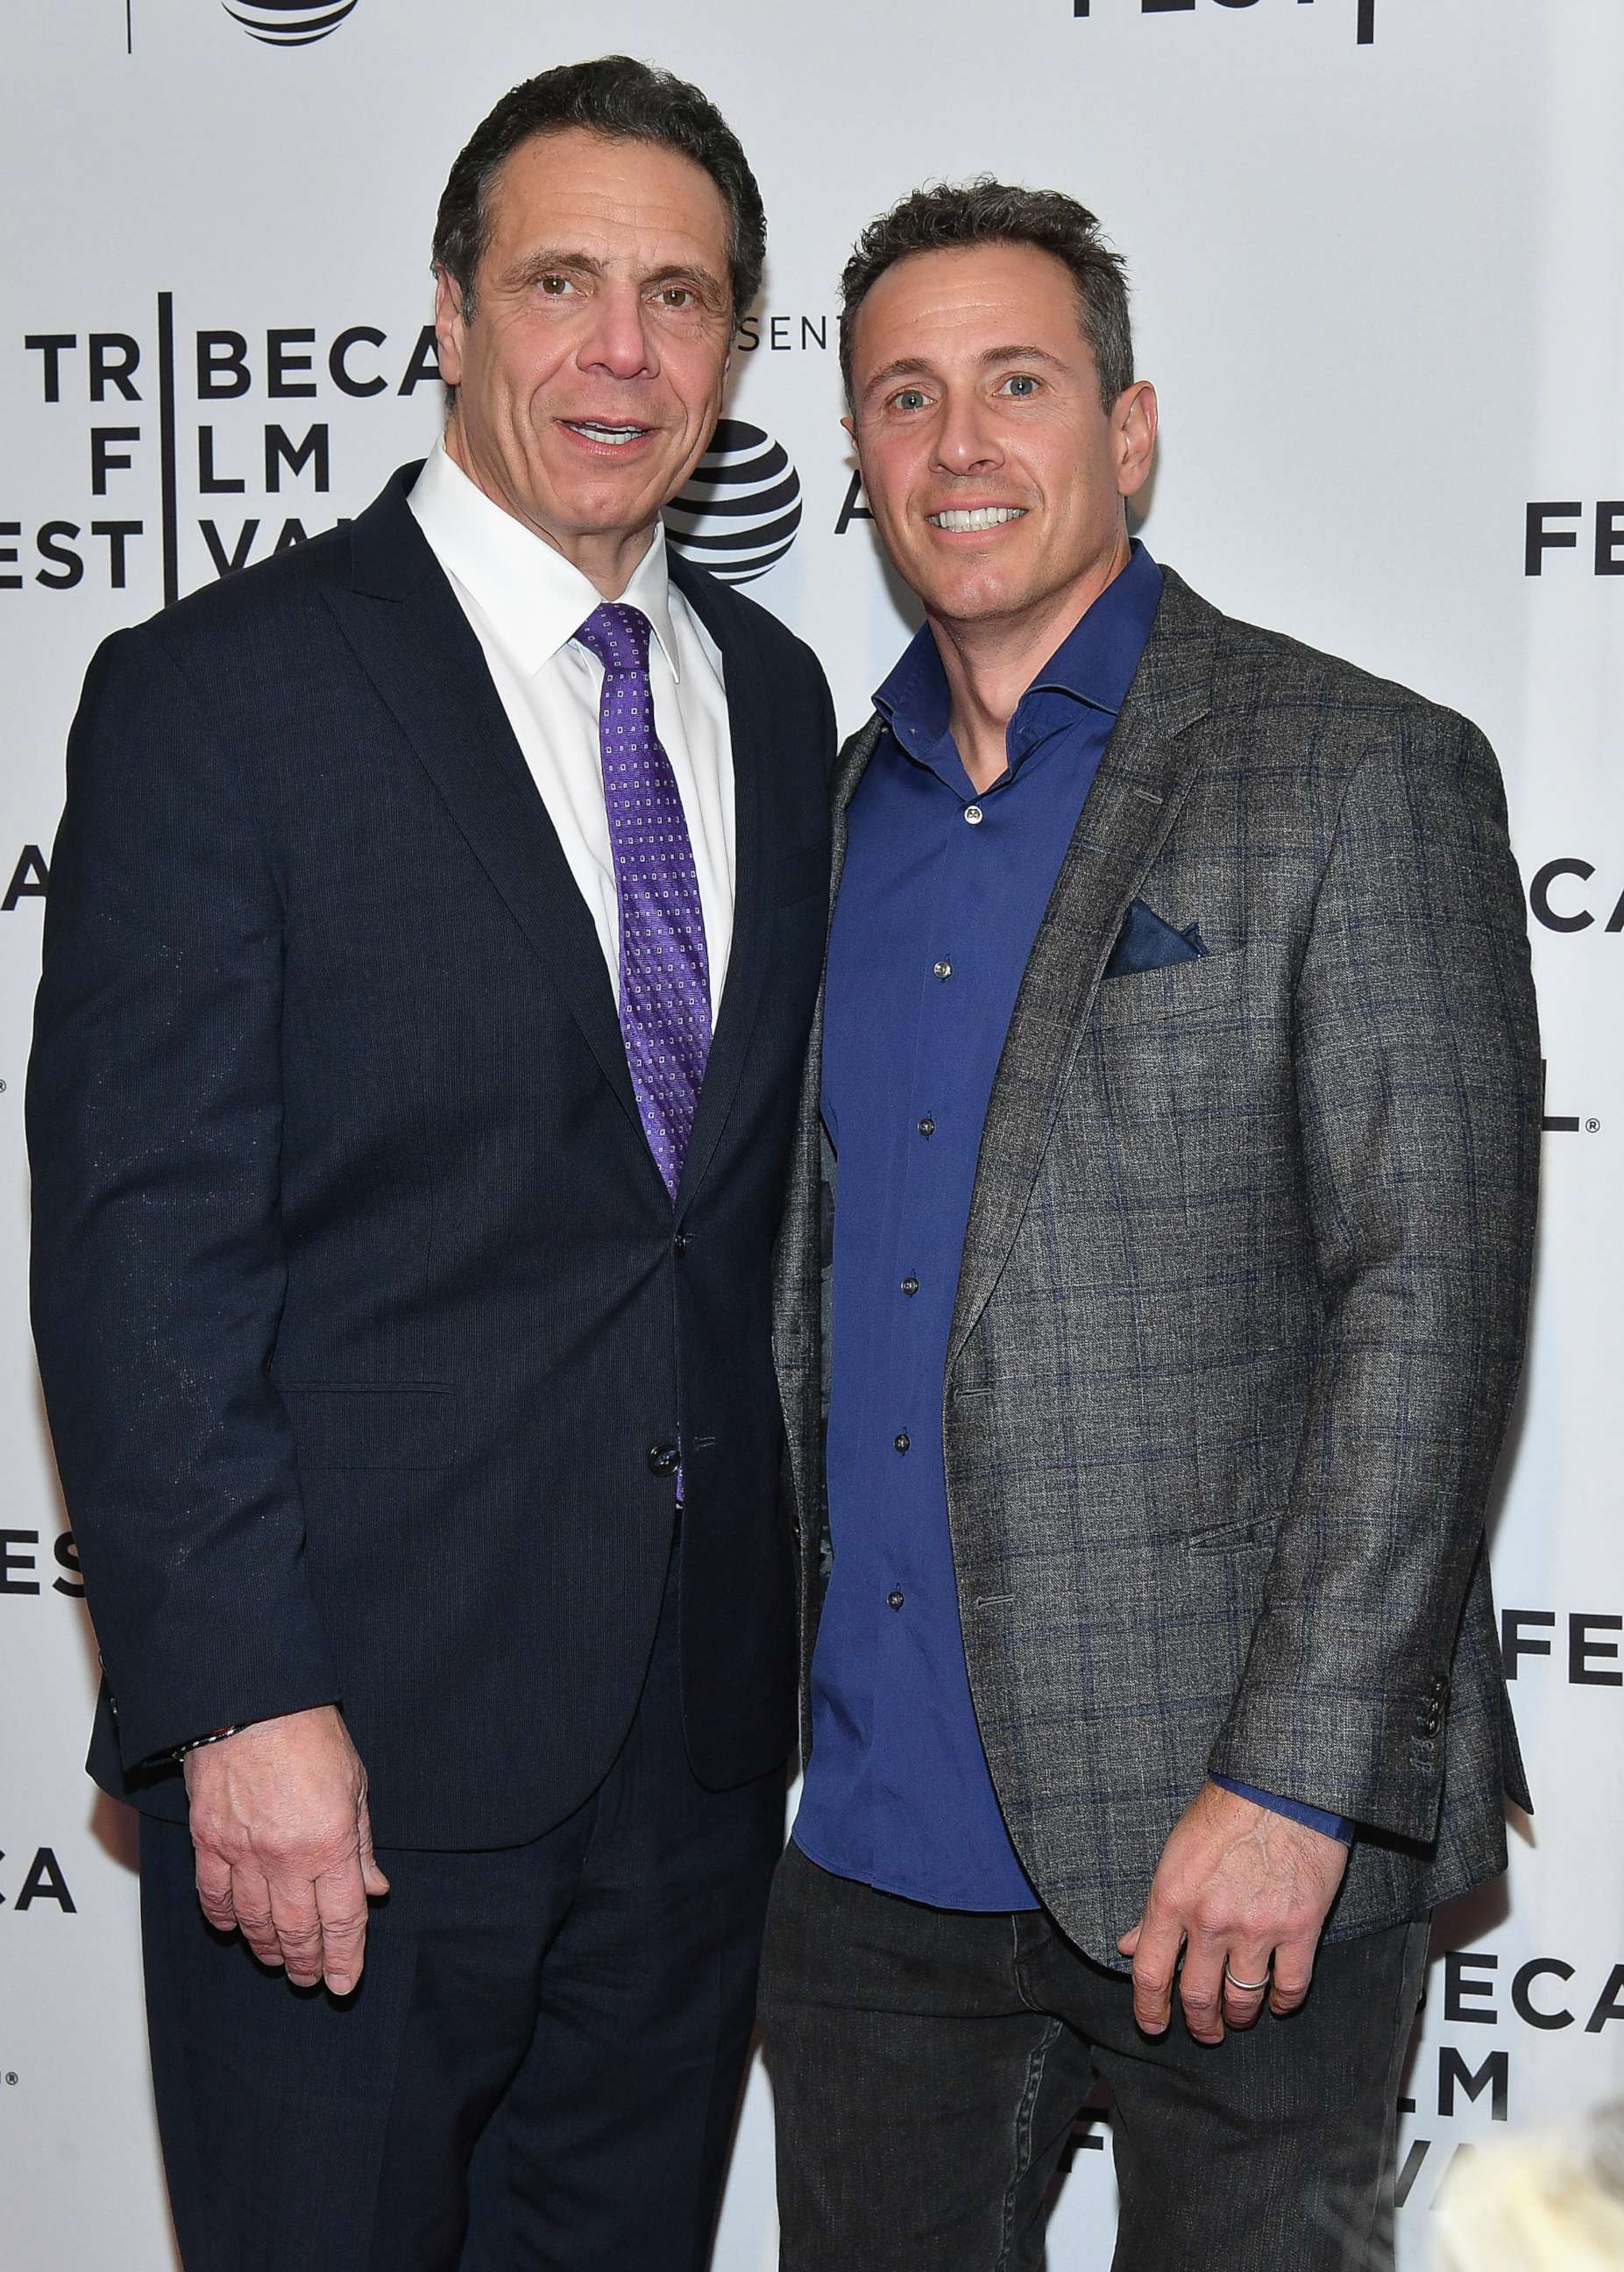 PHOTO: New York Governor Andrew Cuomo and his brother Chris Cuomo attend the 2018 Tribeca Film Festival, April 26, 2018, in New York City.